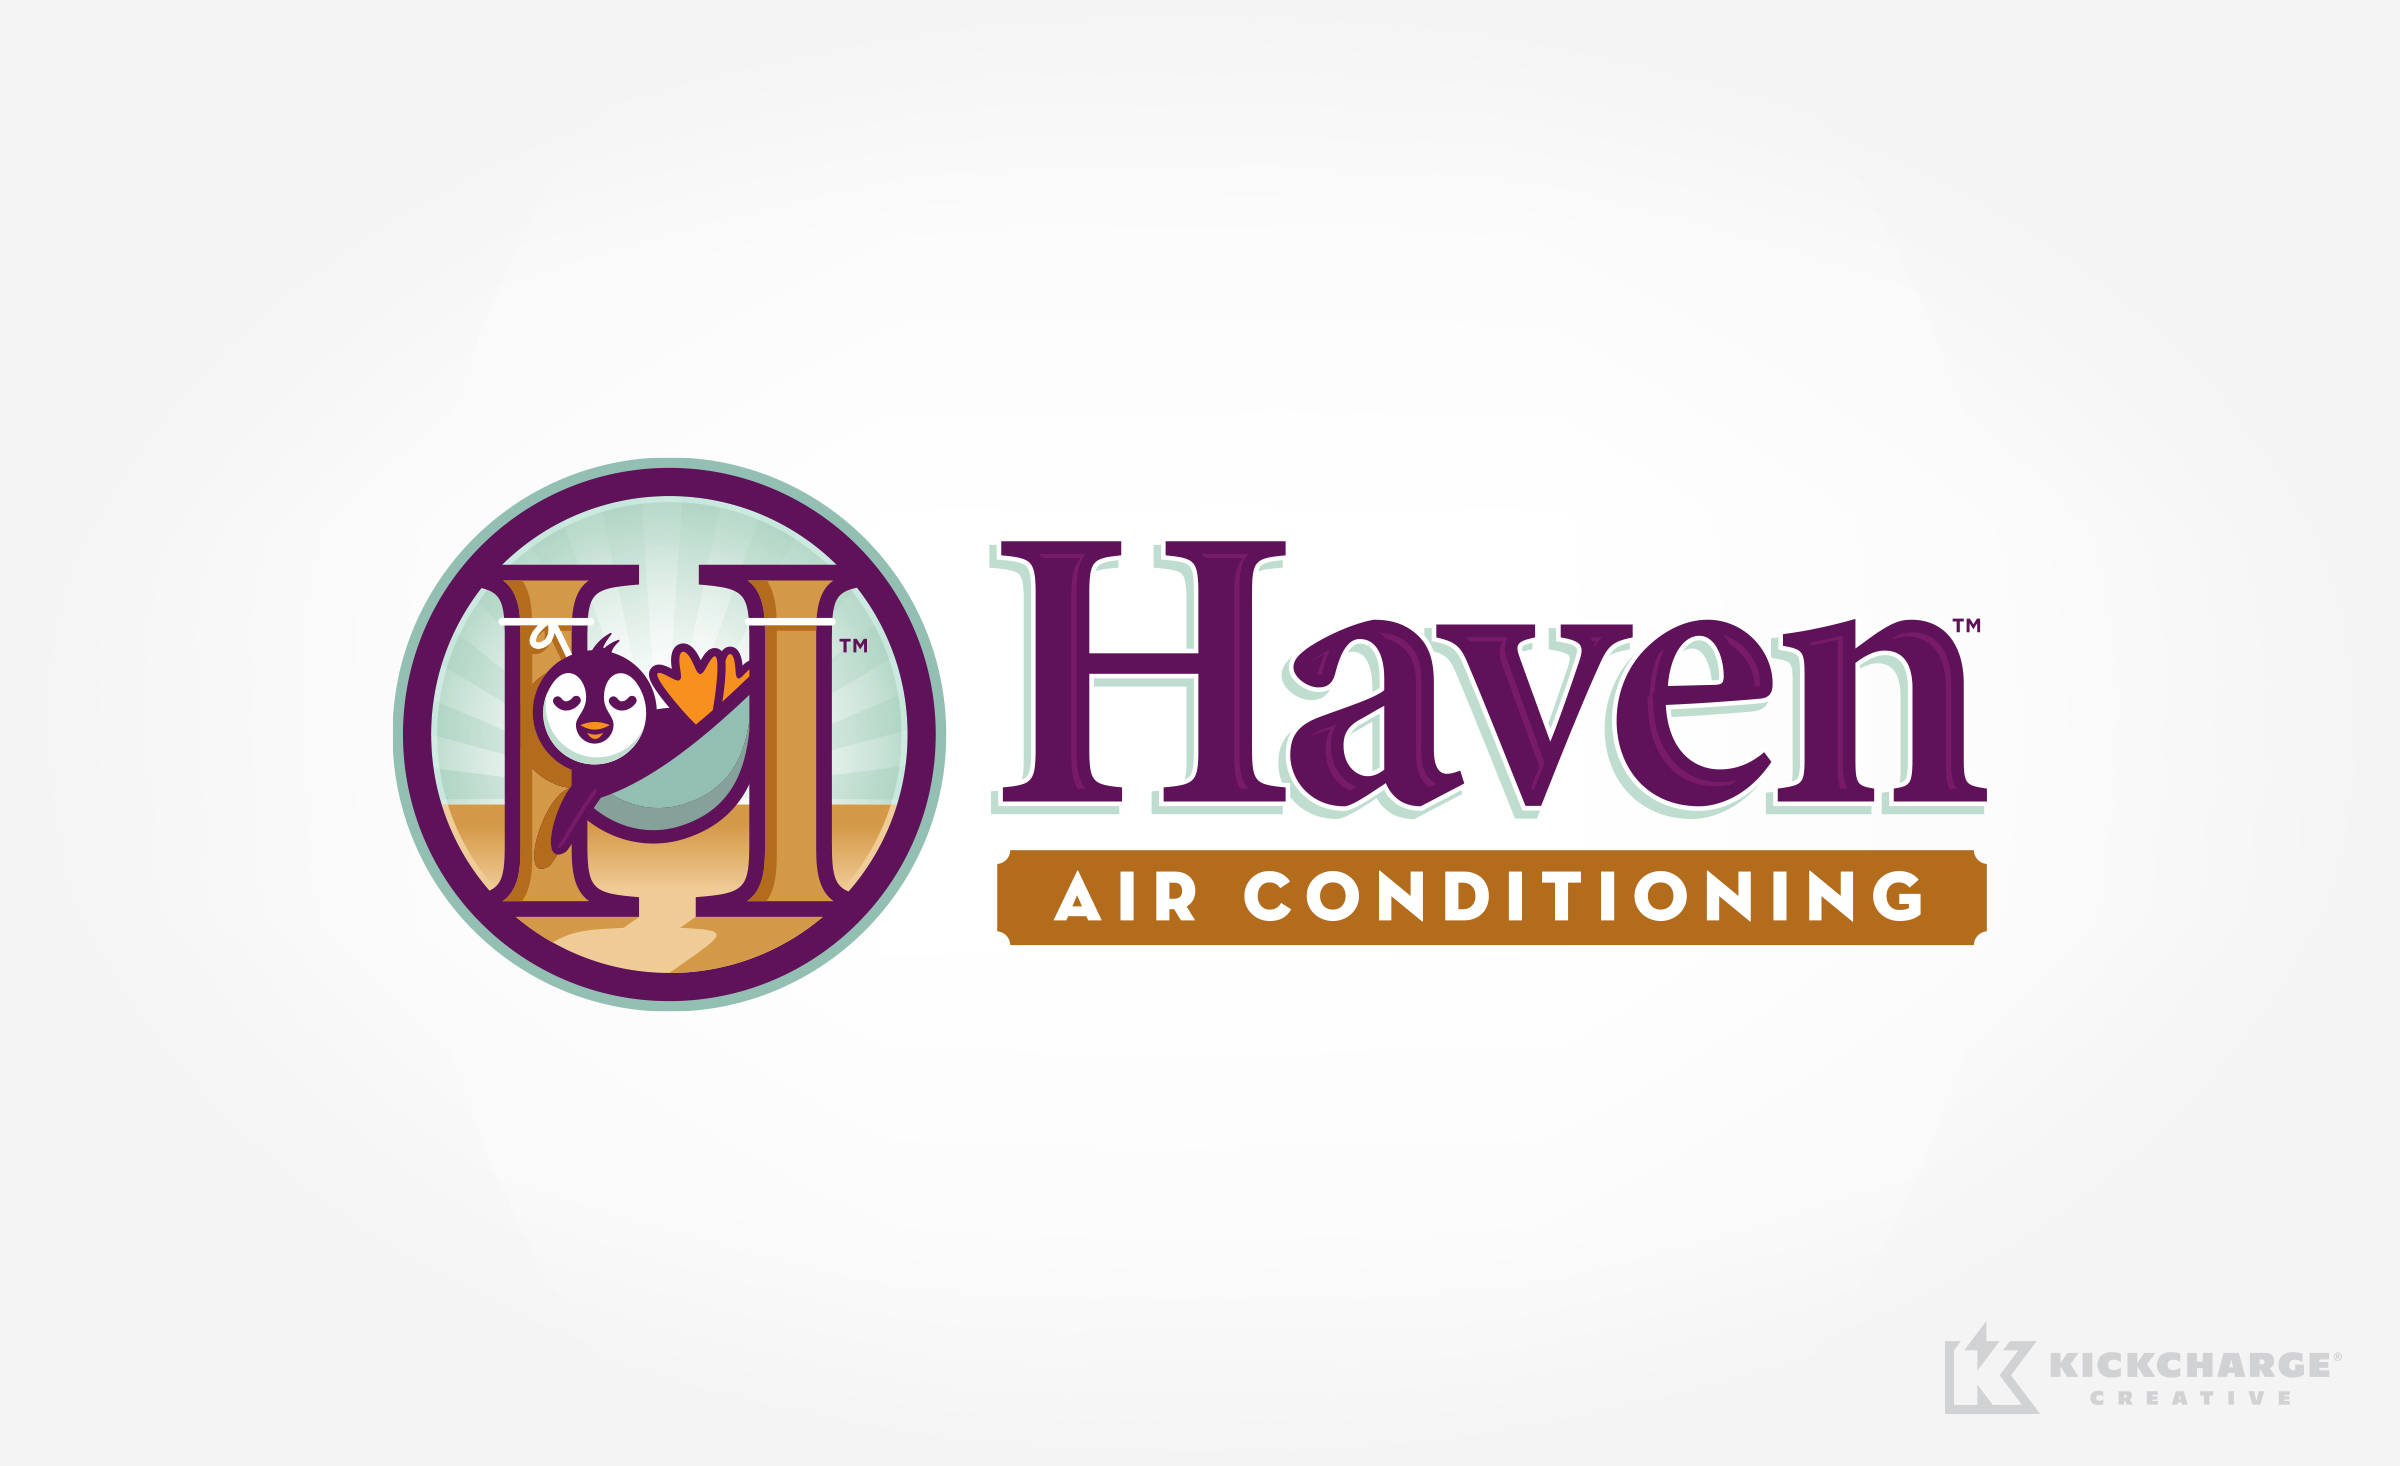 hvac logo for Haven Air Conditioning